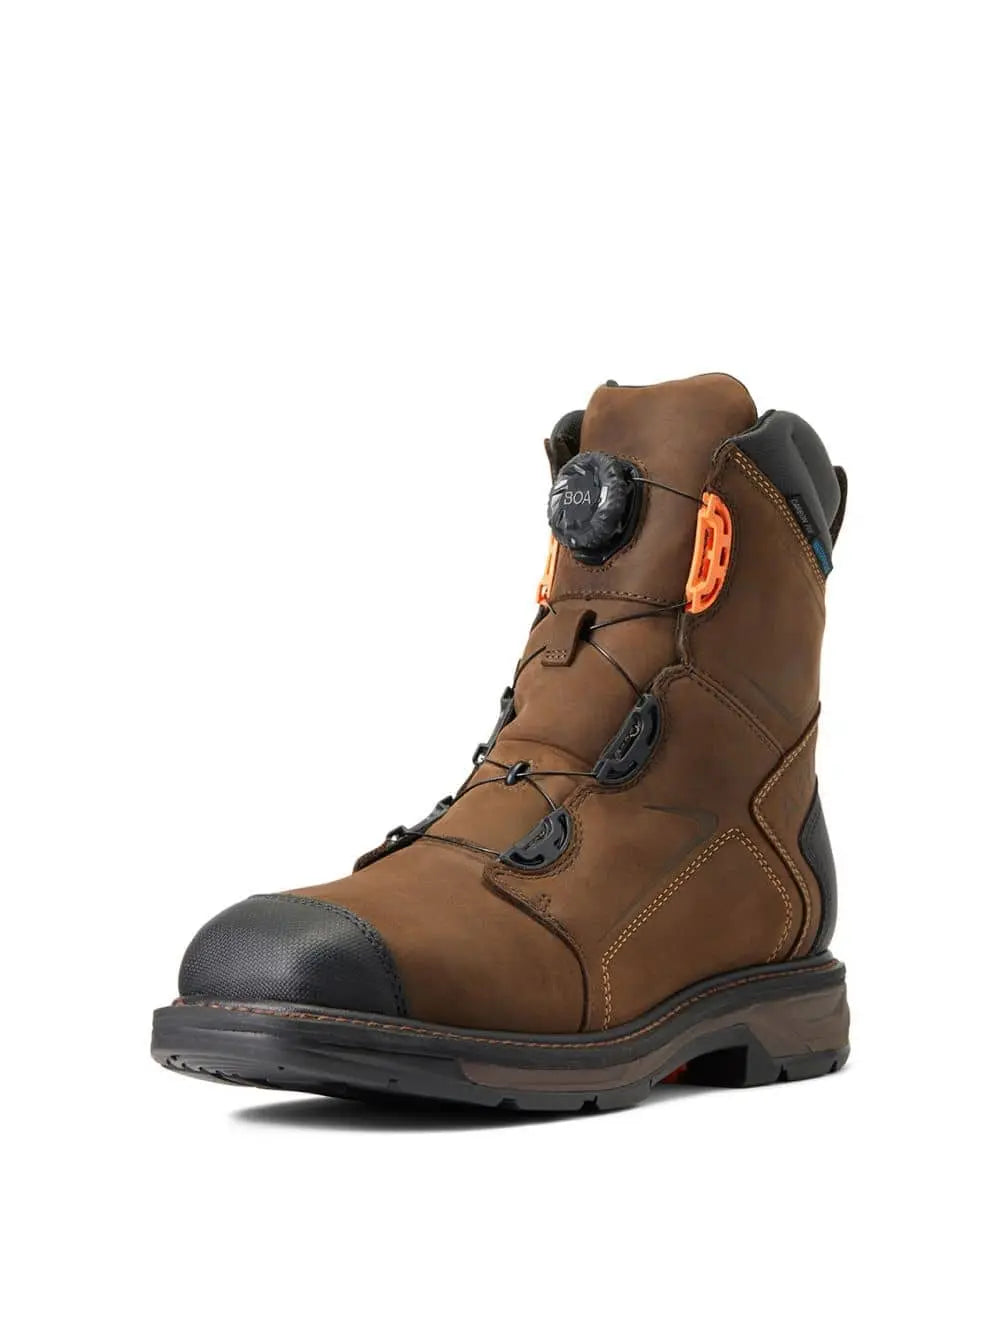 ARIAT  - Workhog XT 8" BOA H2O, Chocolate Brown, Carbon Fiber Toe - Becker Safety and Supply